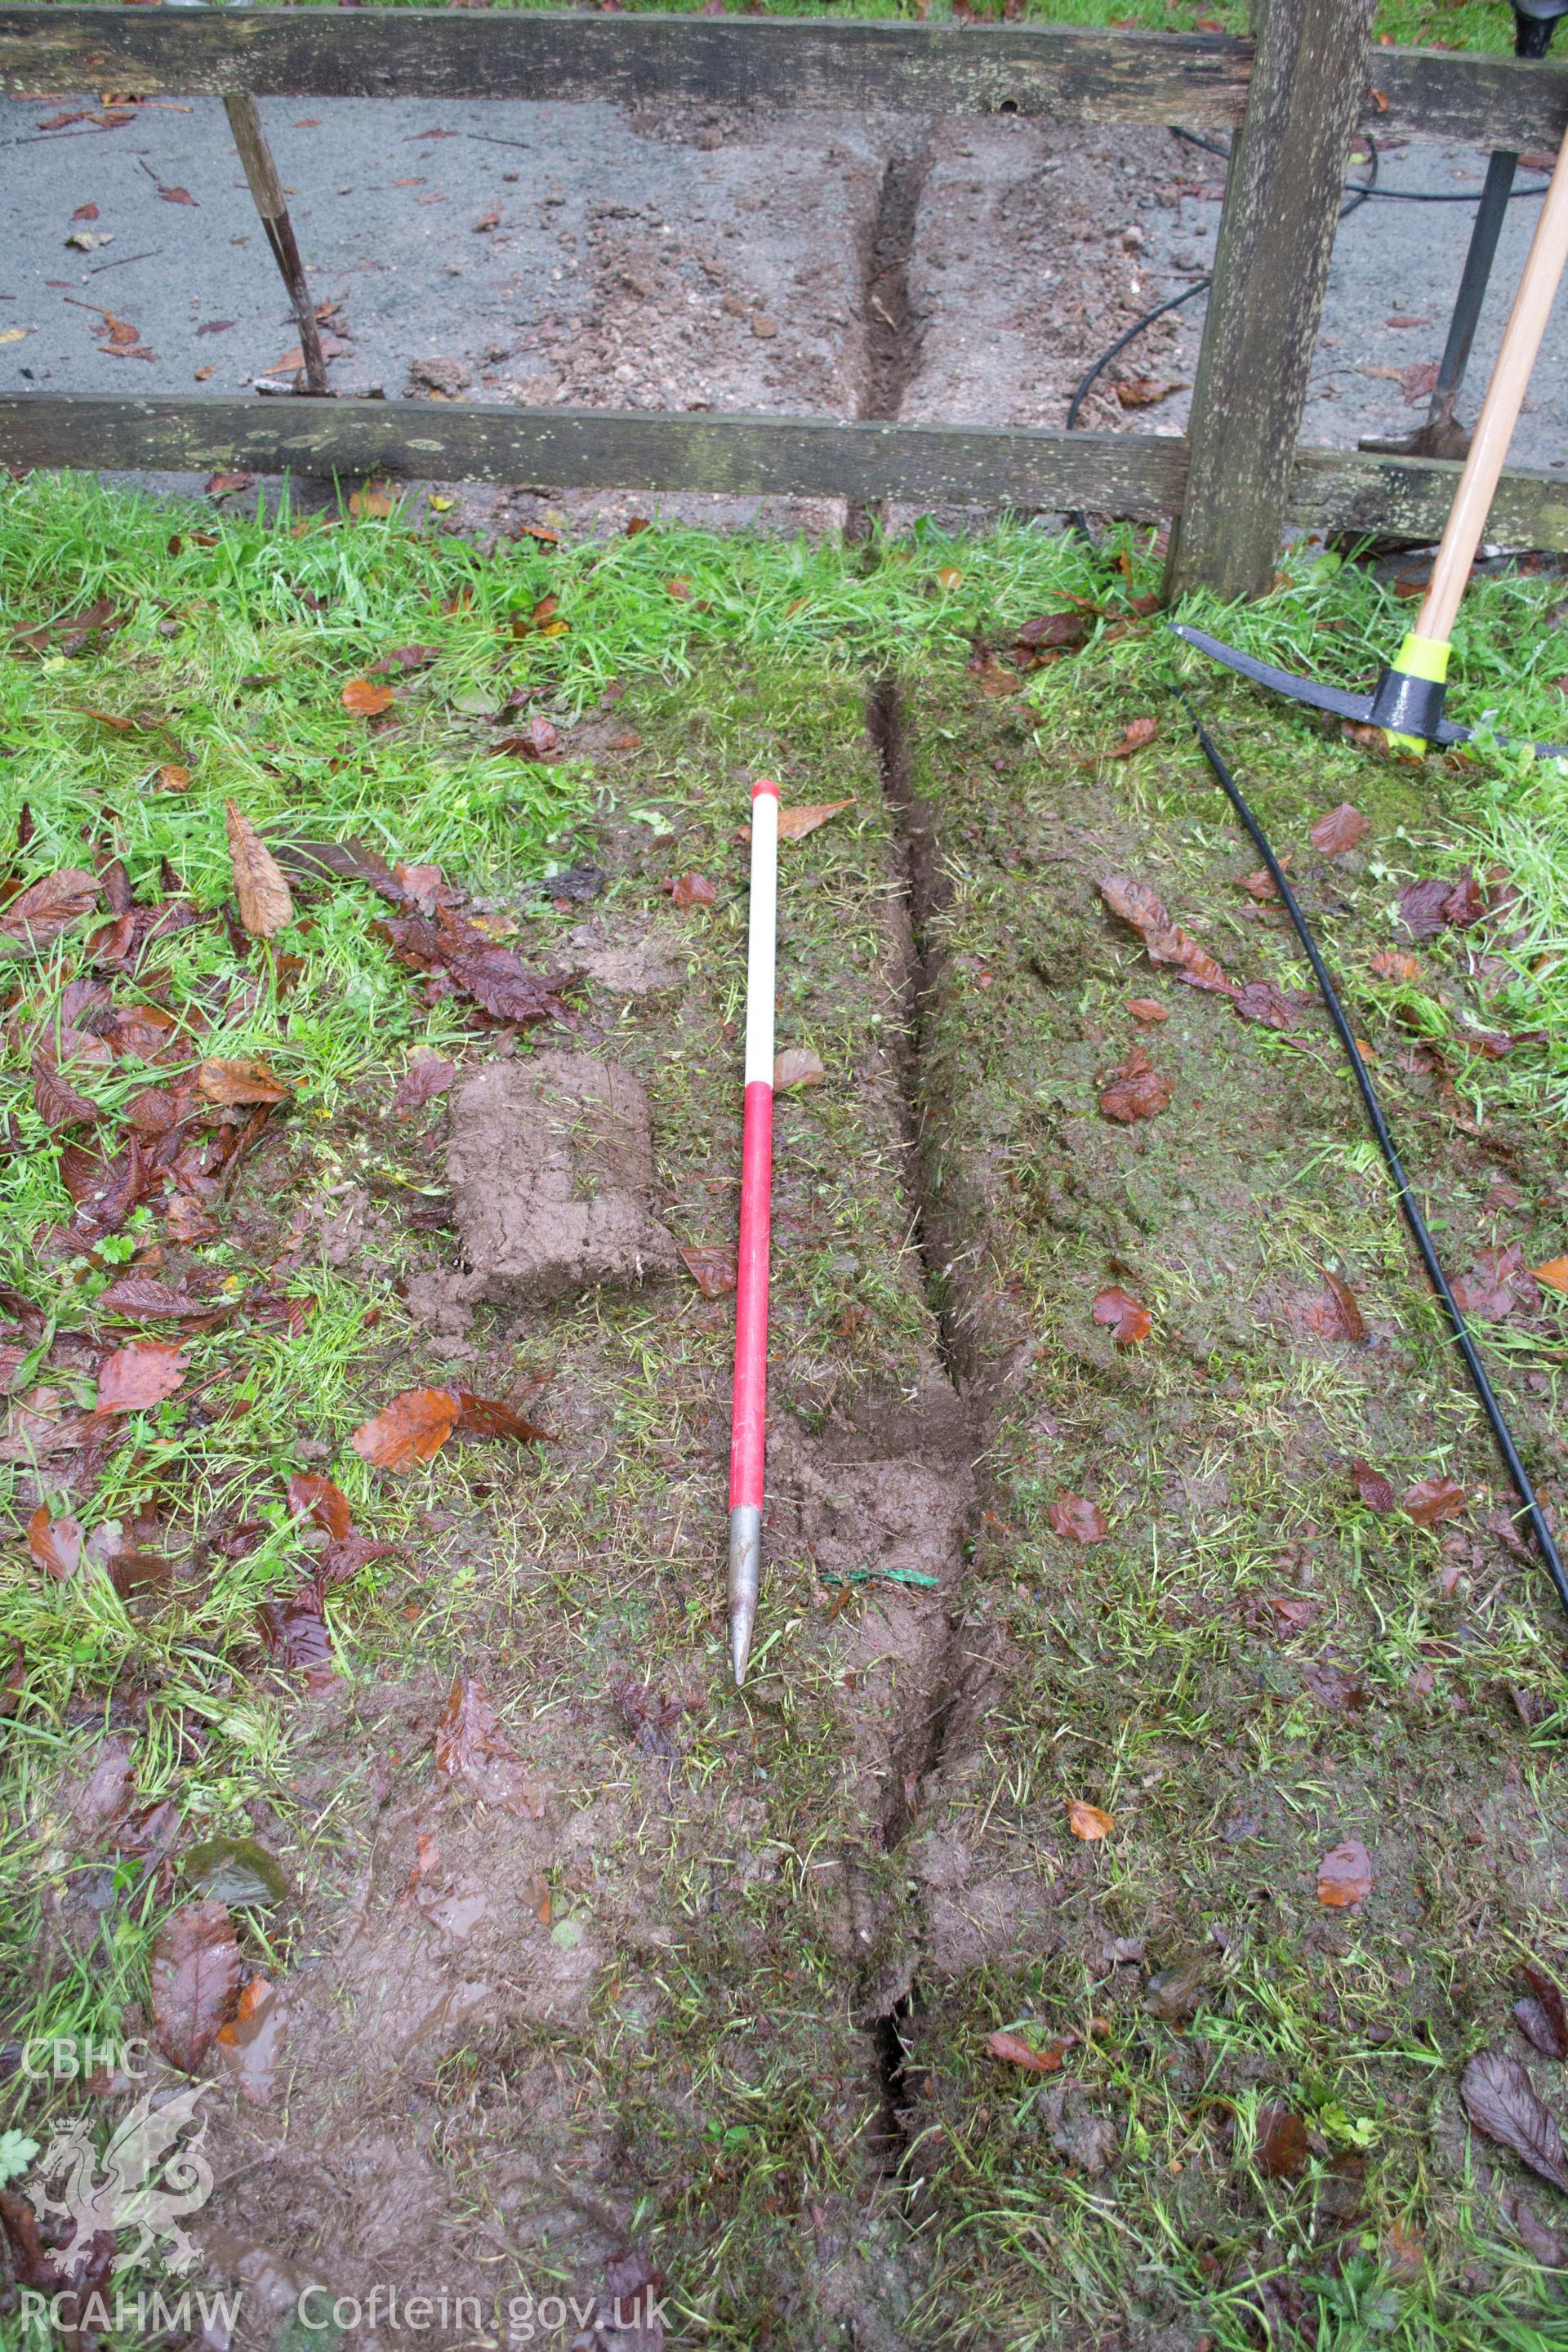 Detailed view from east showing cable trench near western end. Photographed during archaeological watching brief of Plas Newydd, Ynys Mon, conducted by Gwynedd Archaeological Trust on 14th November 2017. Project no. 2542.